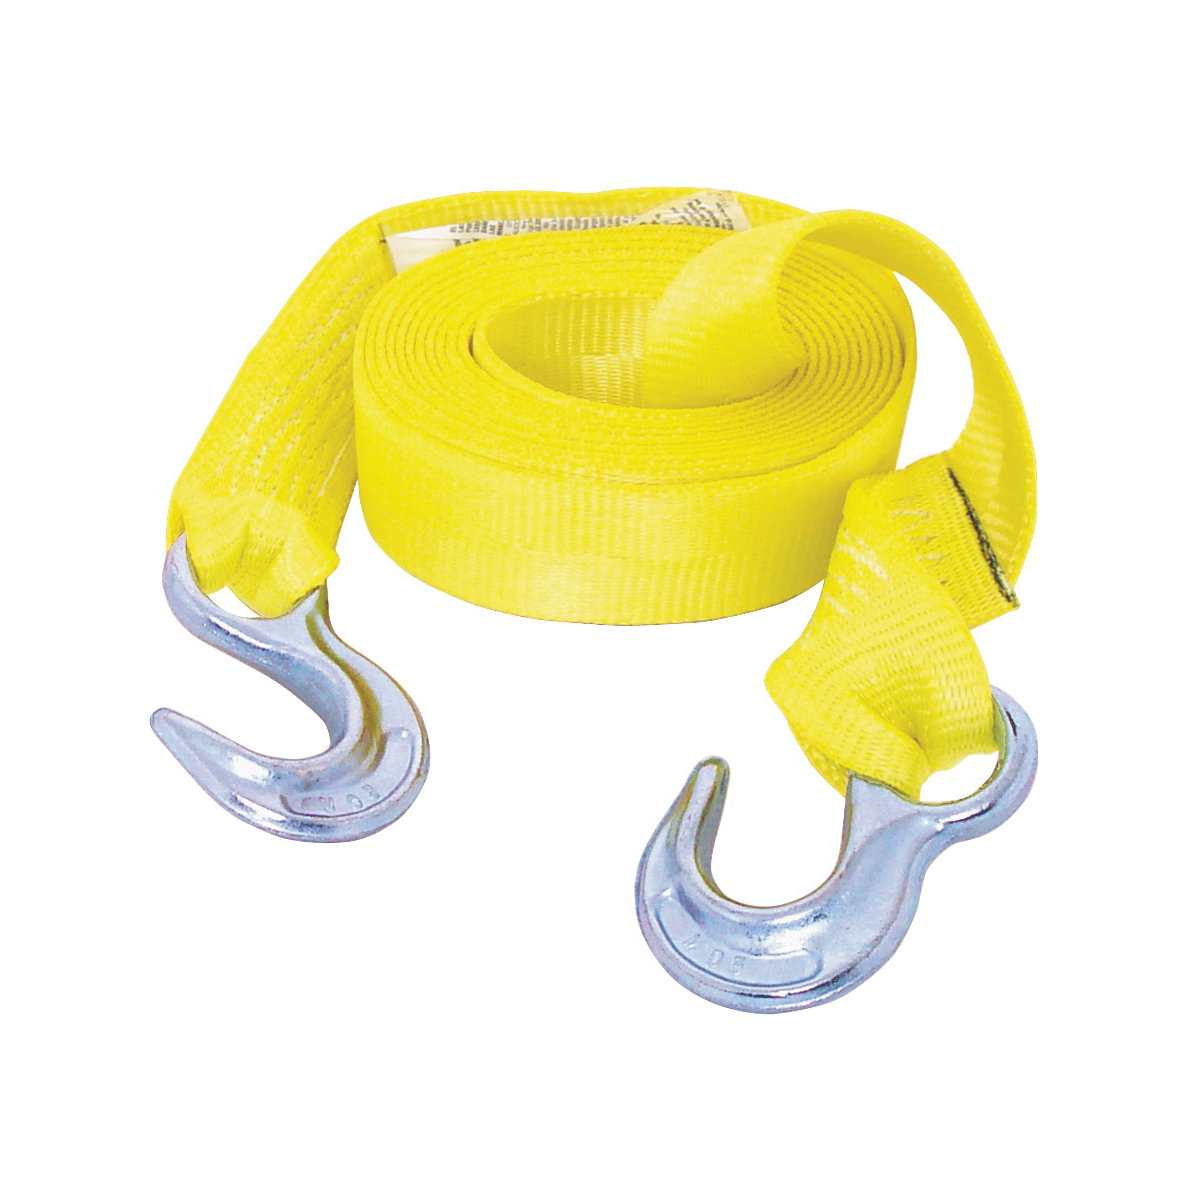 02815 Emergency Tow Strap, 12,000 lb, 2 in W, 15 ft L, Hook End, Polyester, Yellow